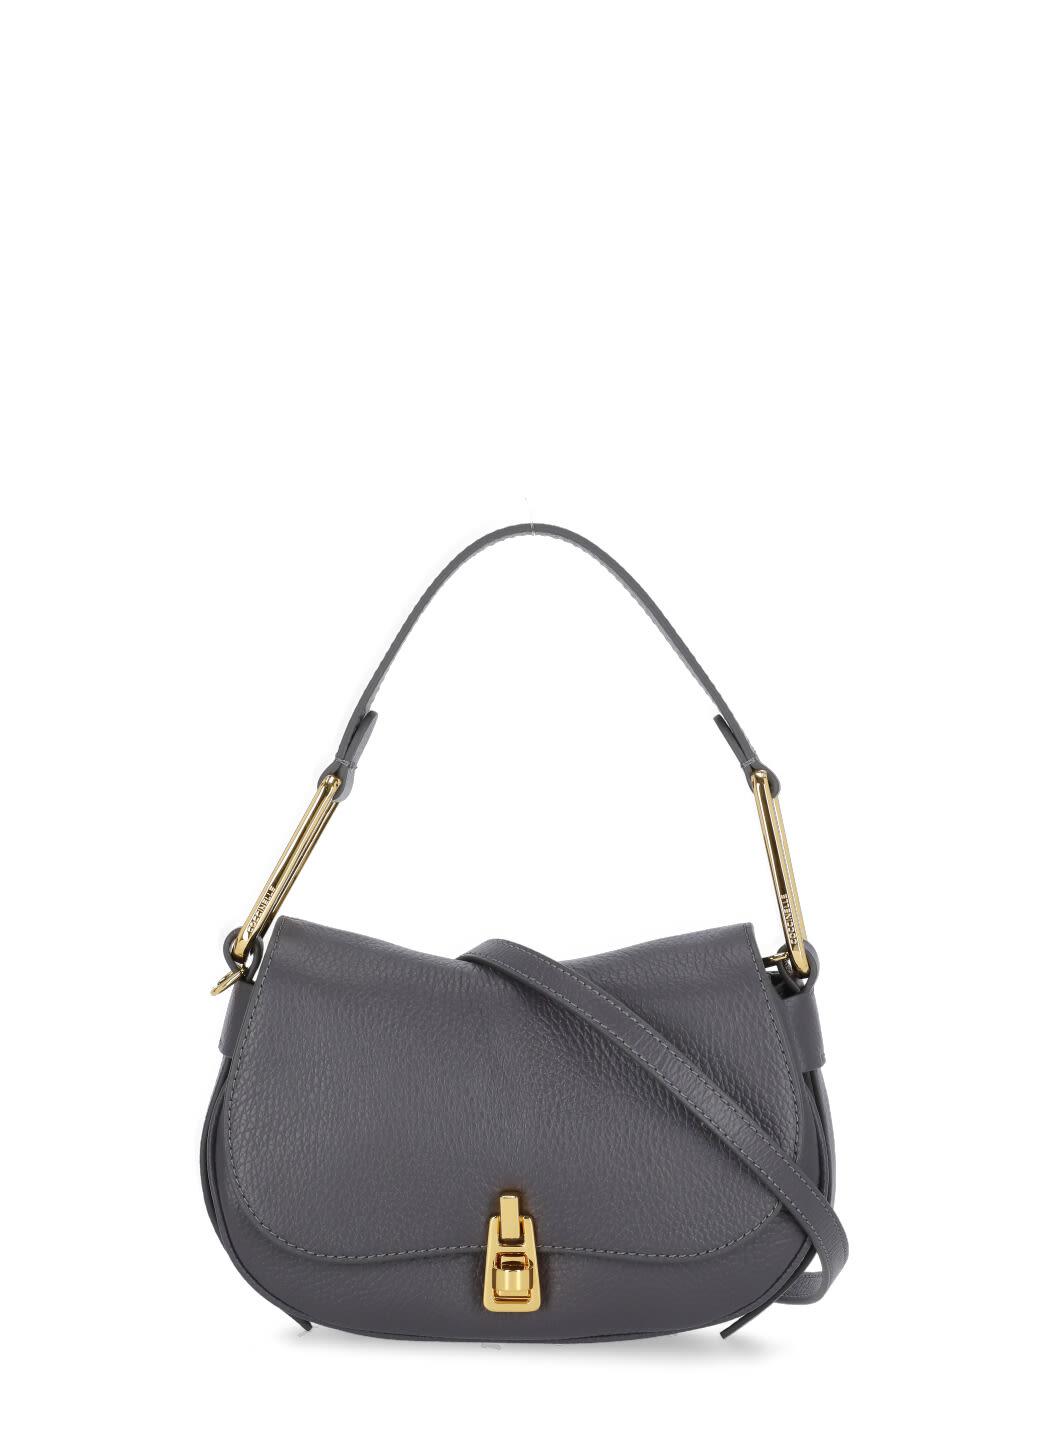 Coccinelle Magie Soft Mini Hand Bag in Gray | Lyst